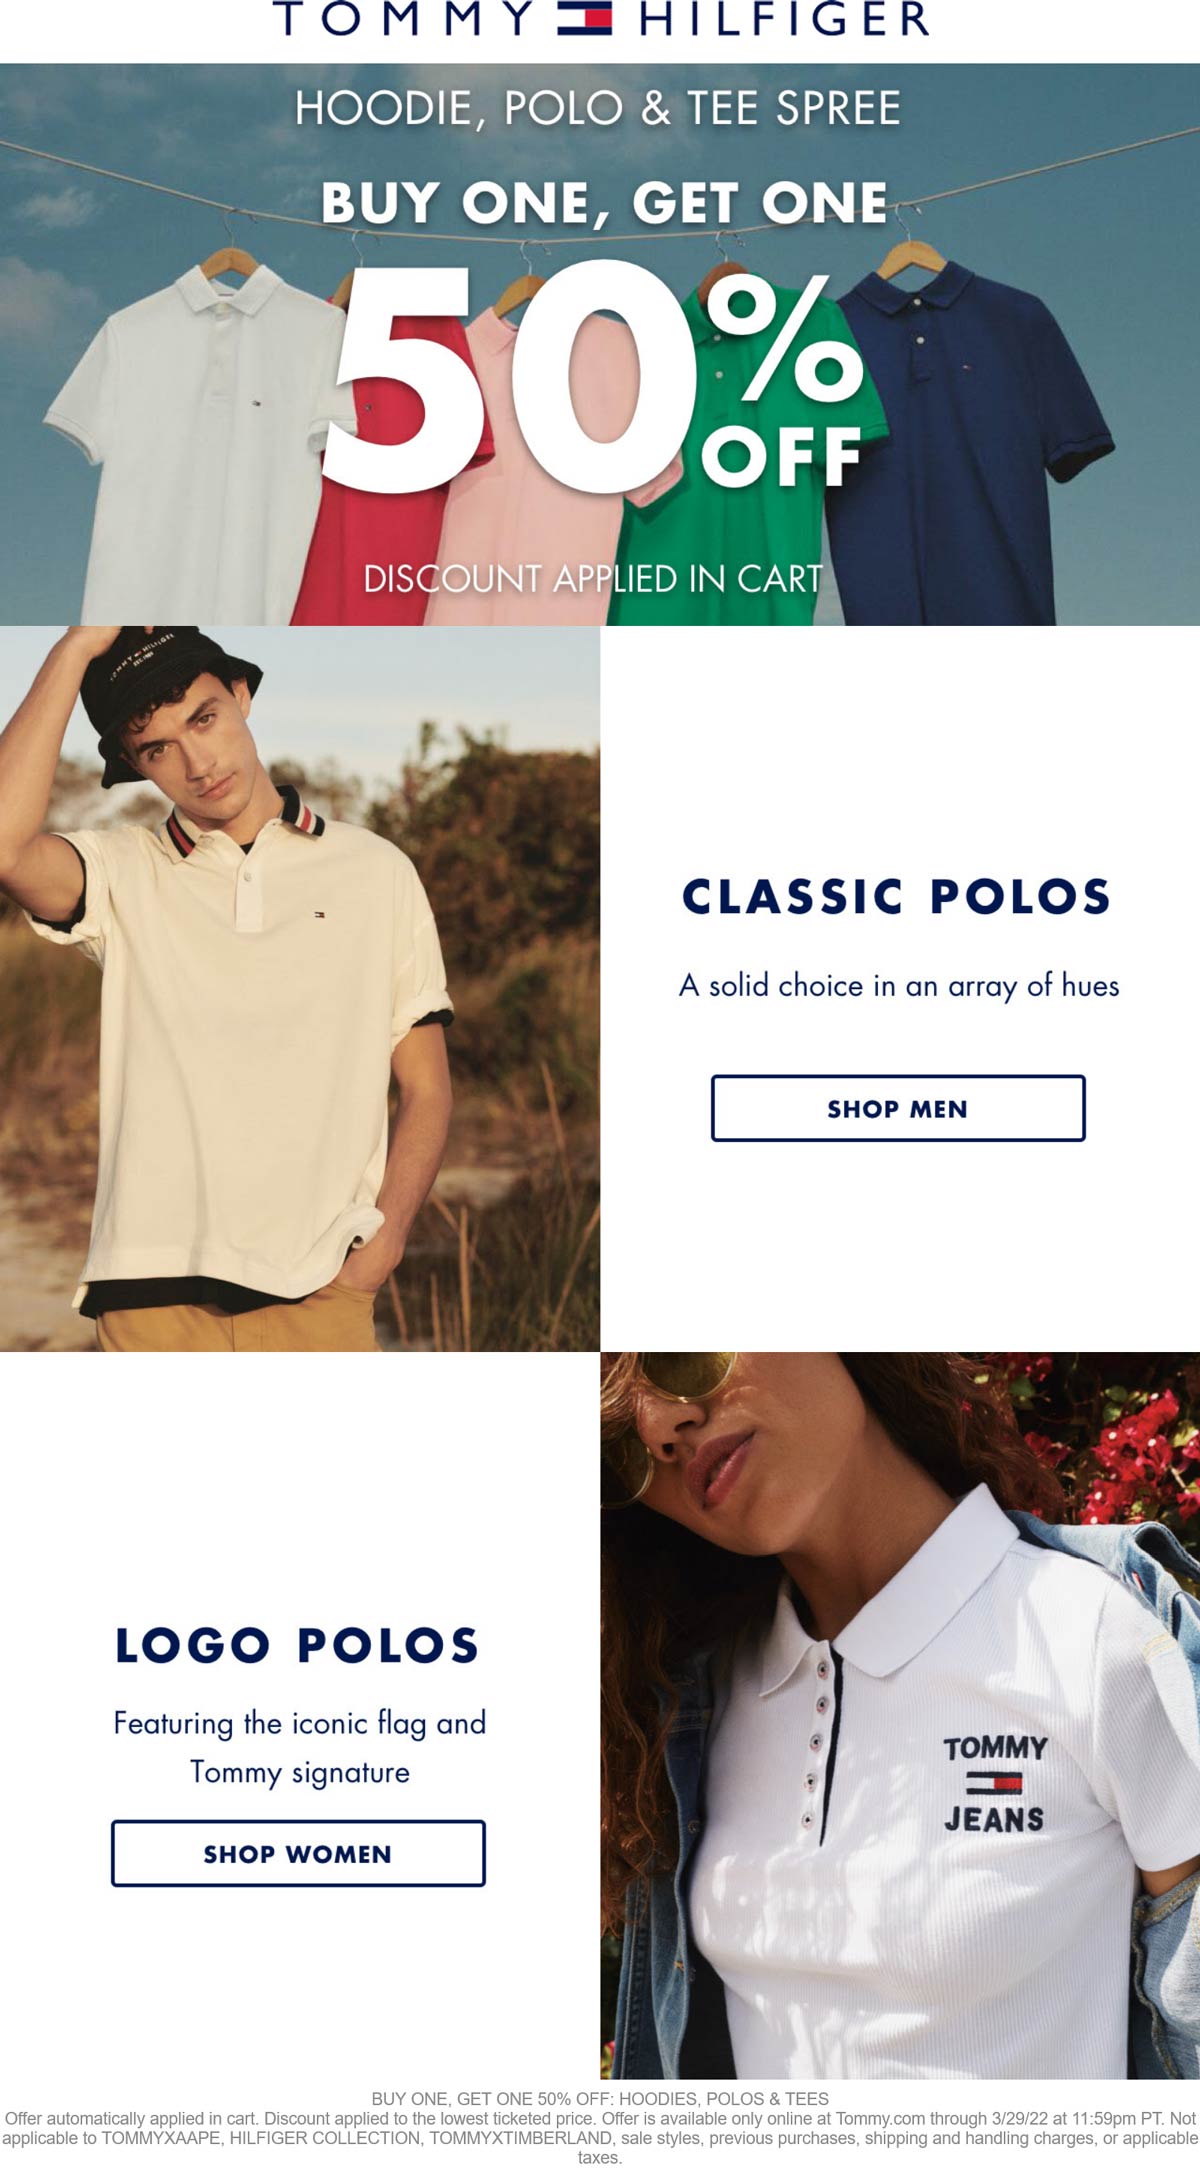 Tommy Hilfiger stores Coupon  Second hoodie polo or tee 50% off online at Tommy Hilfiger #tommyhilfiger 